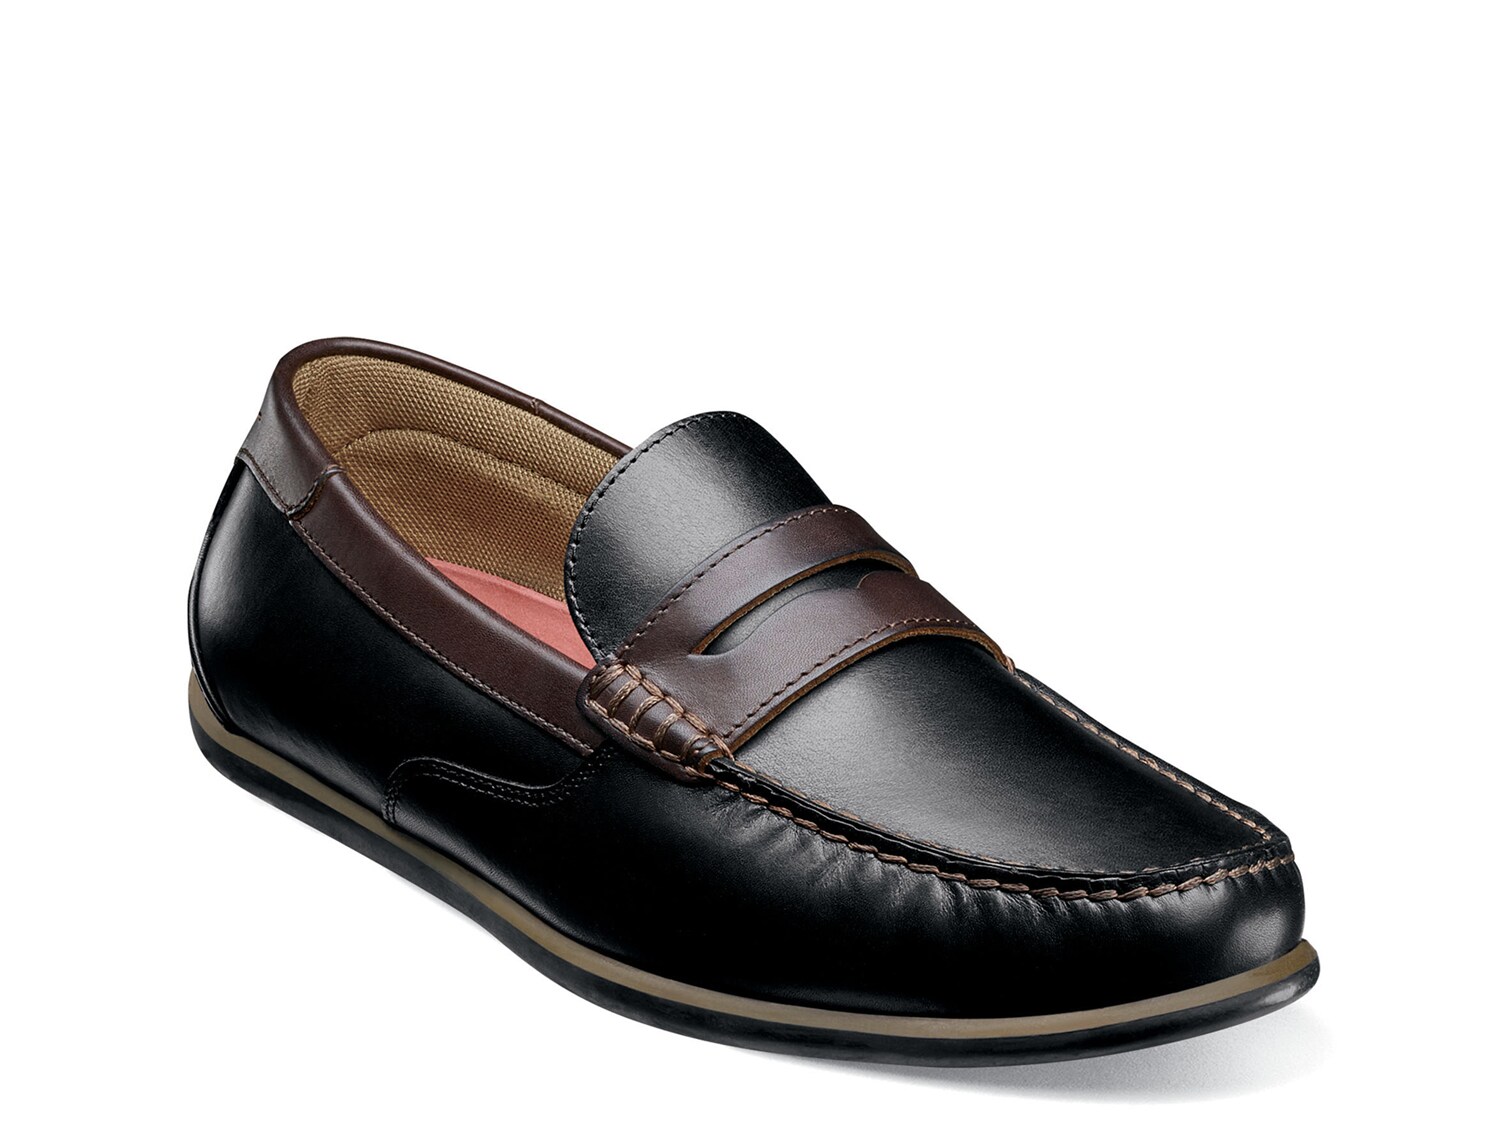 Florsheim 13350 Sportster Penny Loafer - Free Shipping | DSW